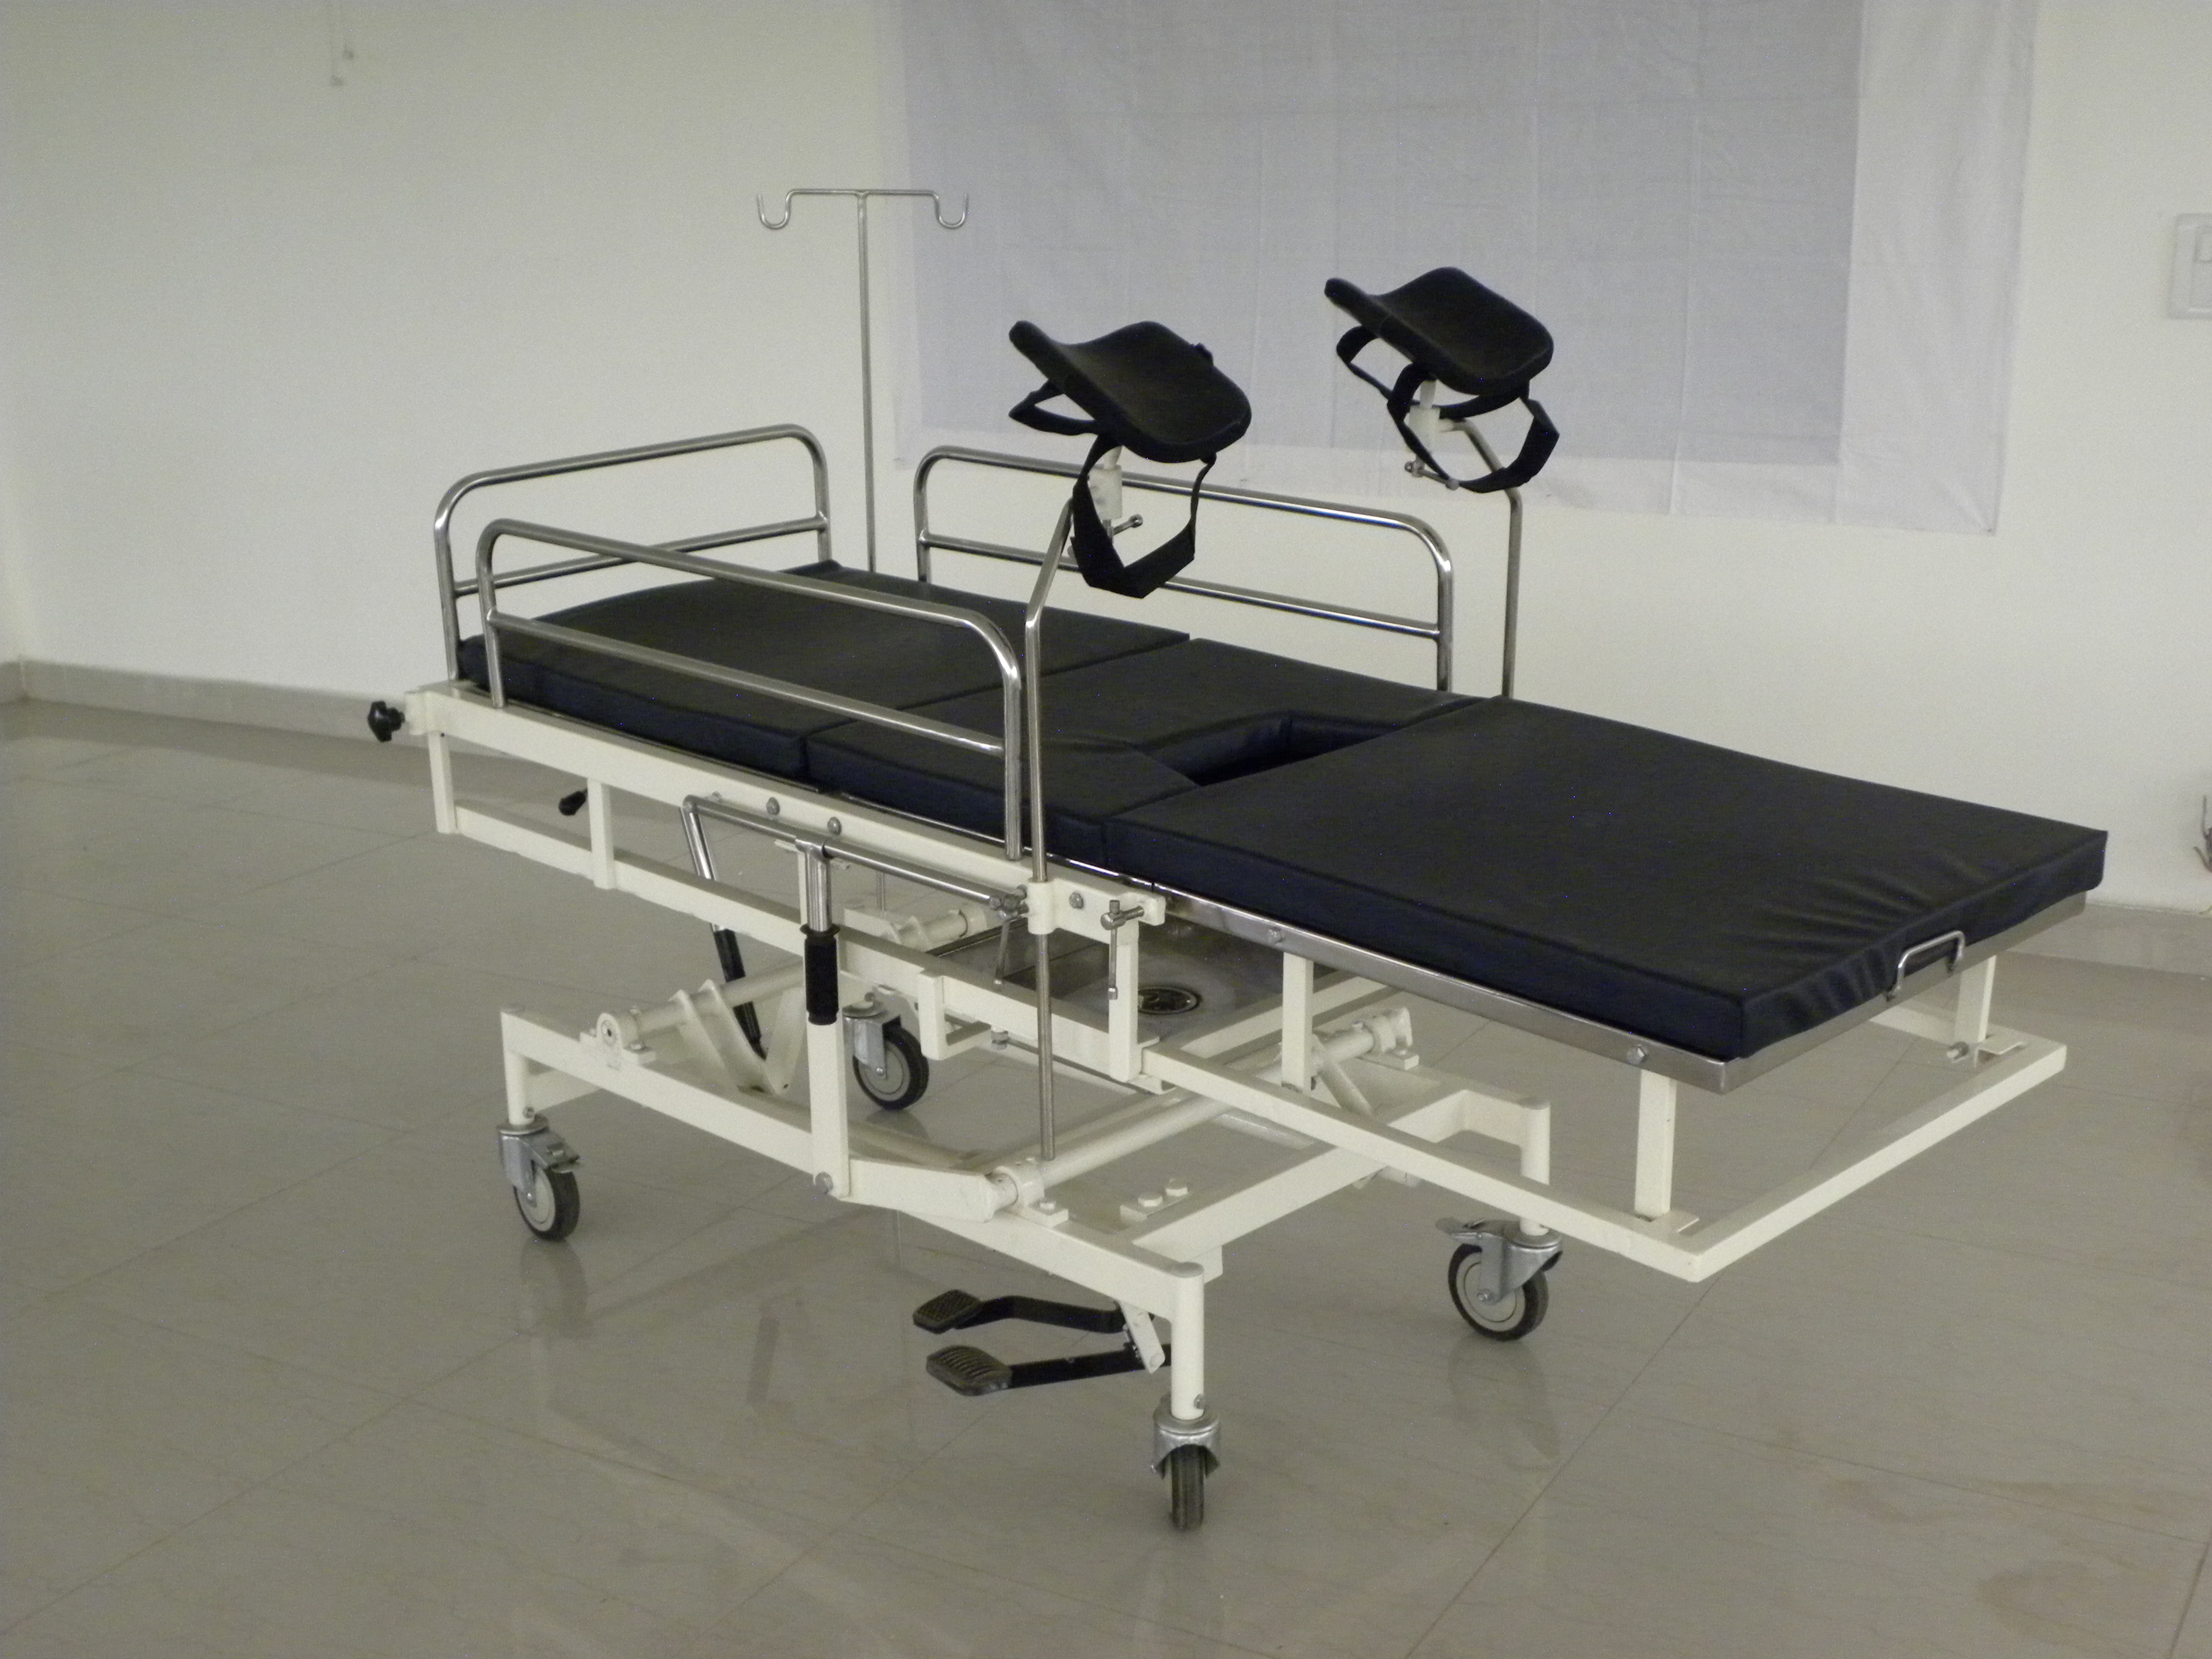 Labour Delivery Bed